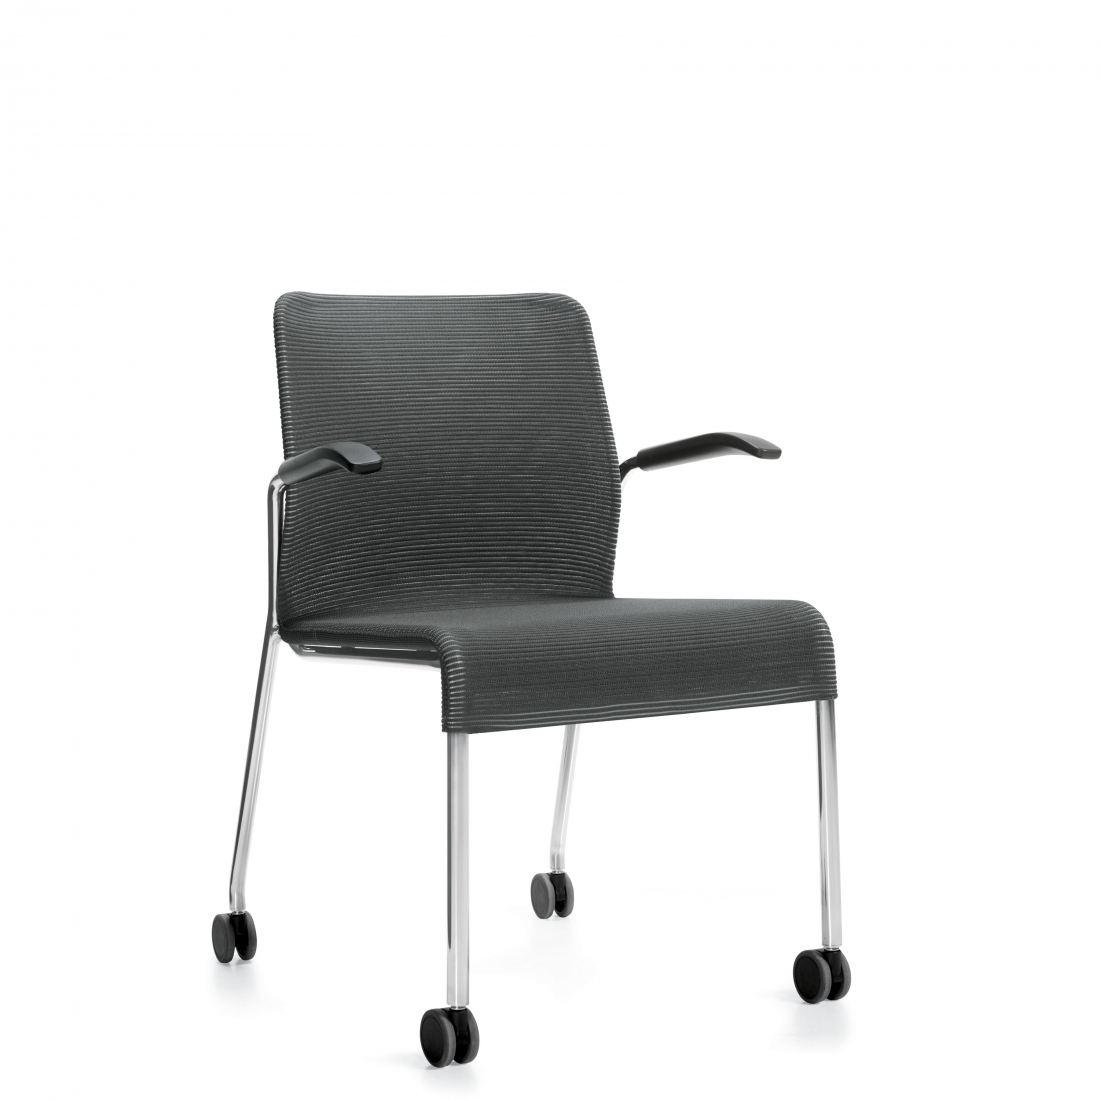 Armchair, Cantilever Arms & Casters